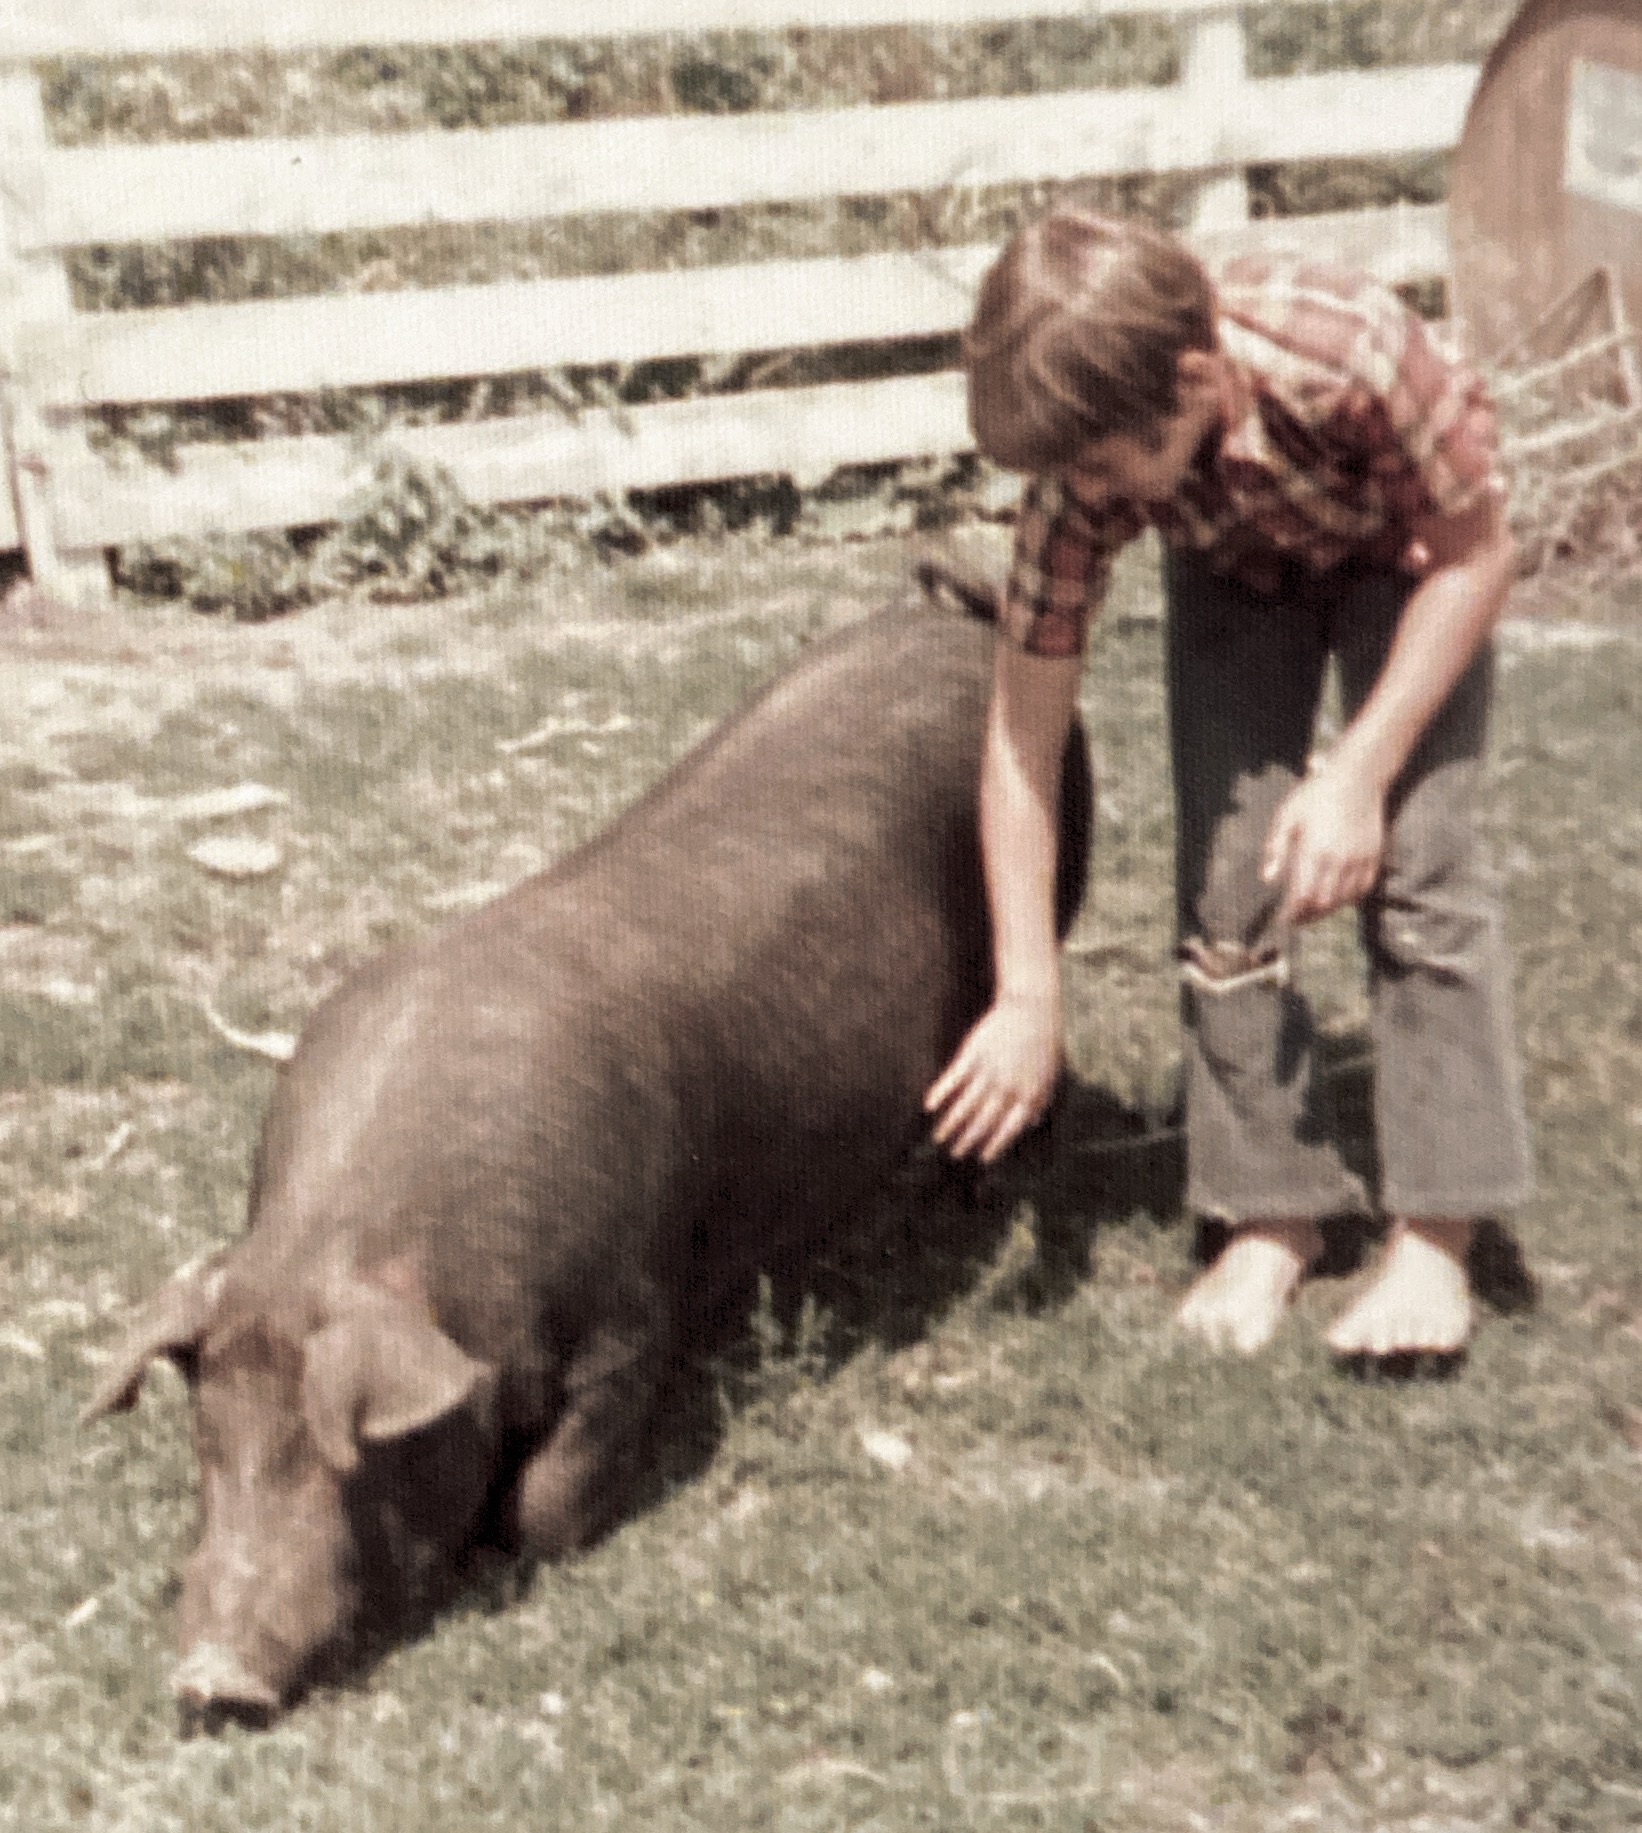 Feef with his pet pig - 1971